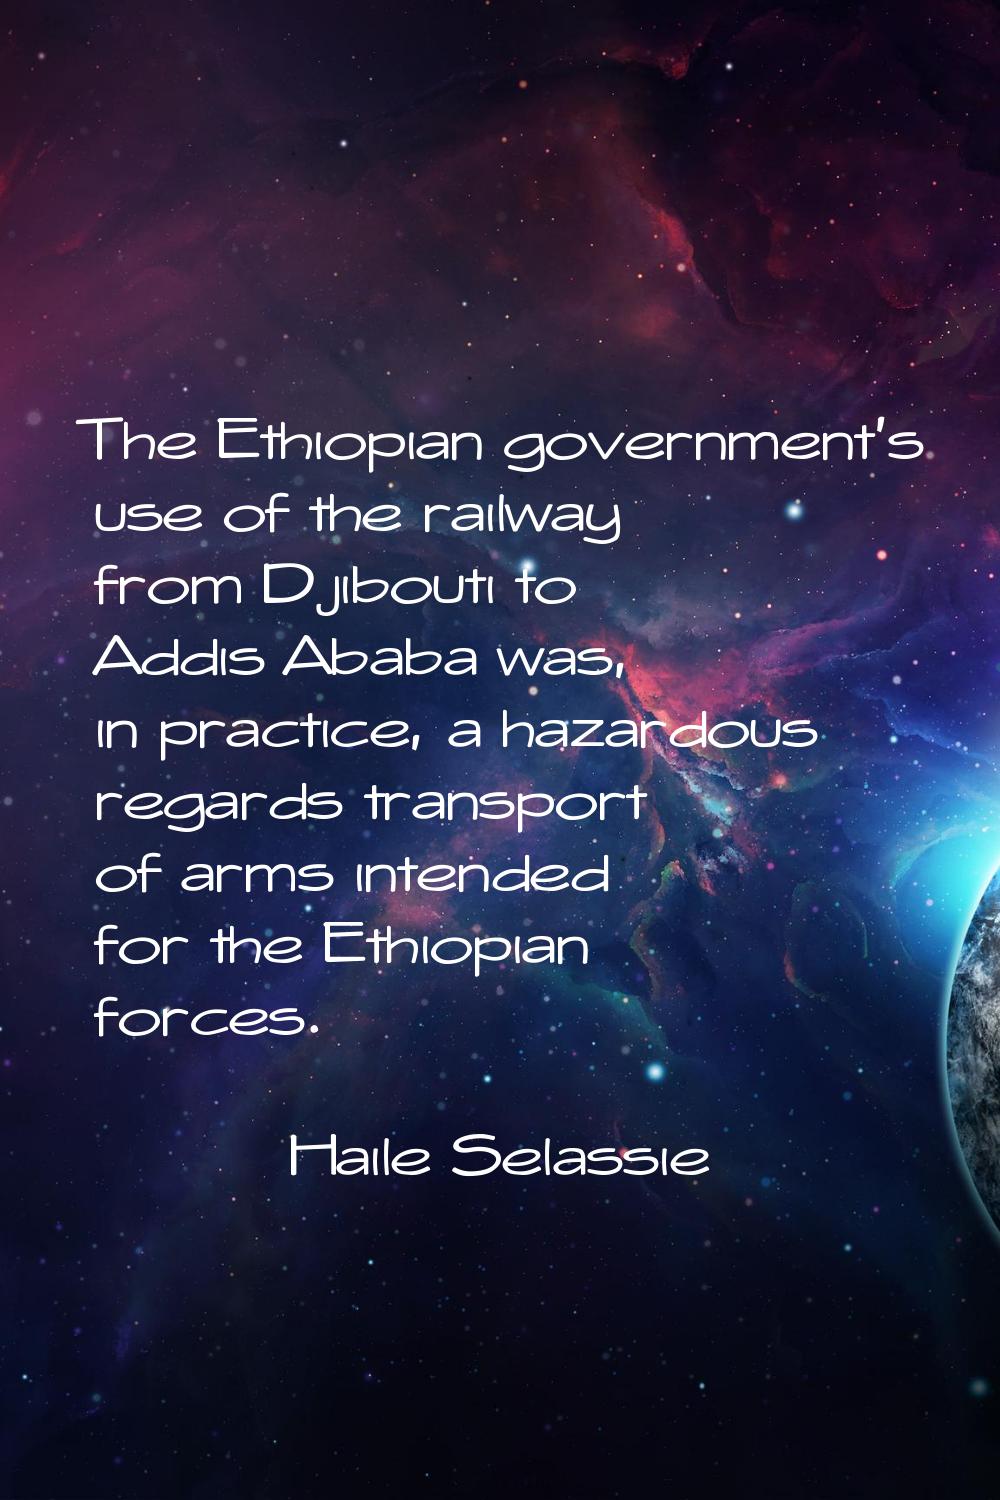 The Ethiopian government's use of the railway from Djibouti to Addis Ababa was, in practice, a haza